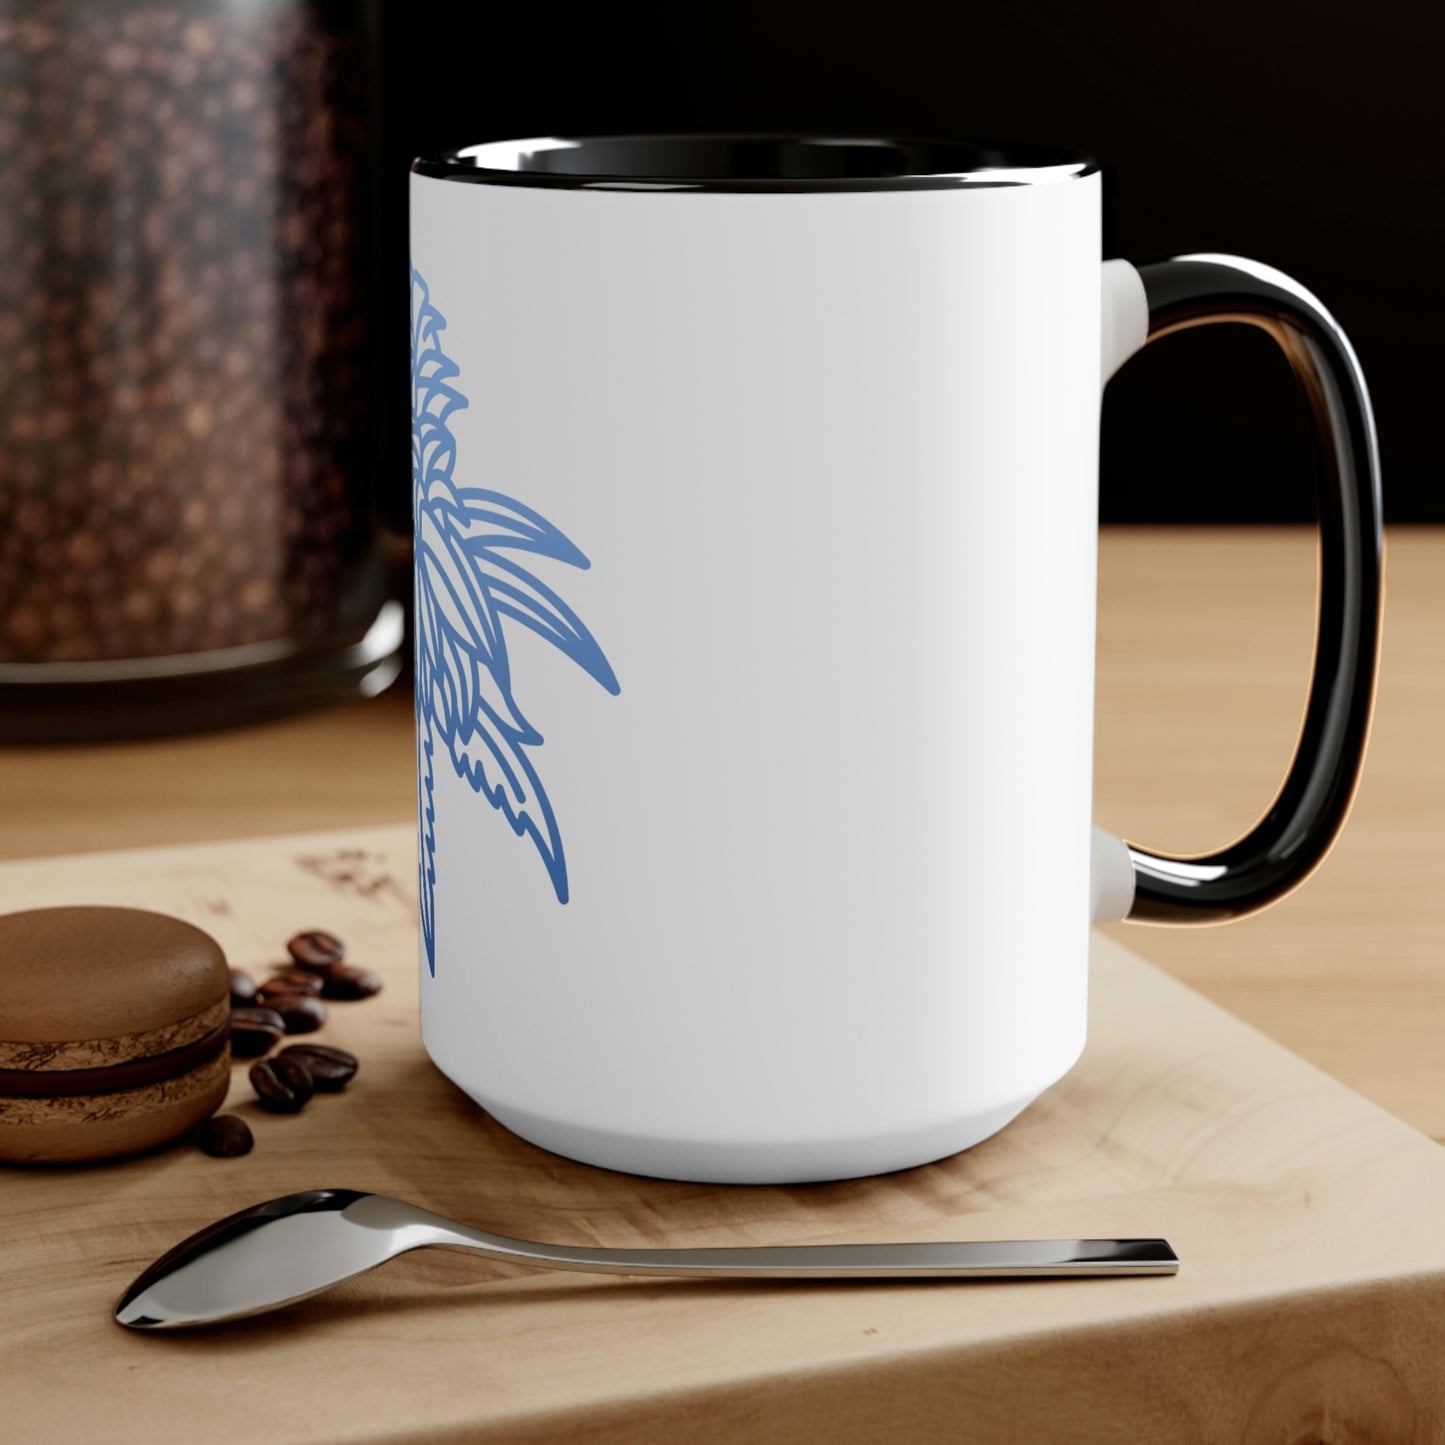 a Blue Dream Cannabis Coffee Mug with a blue and white design on it.